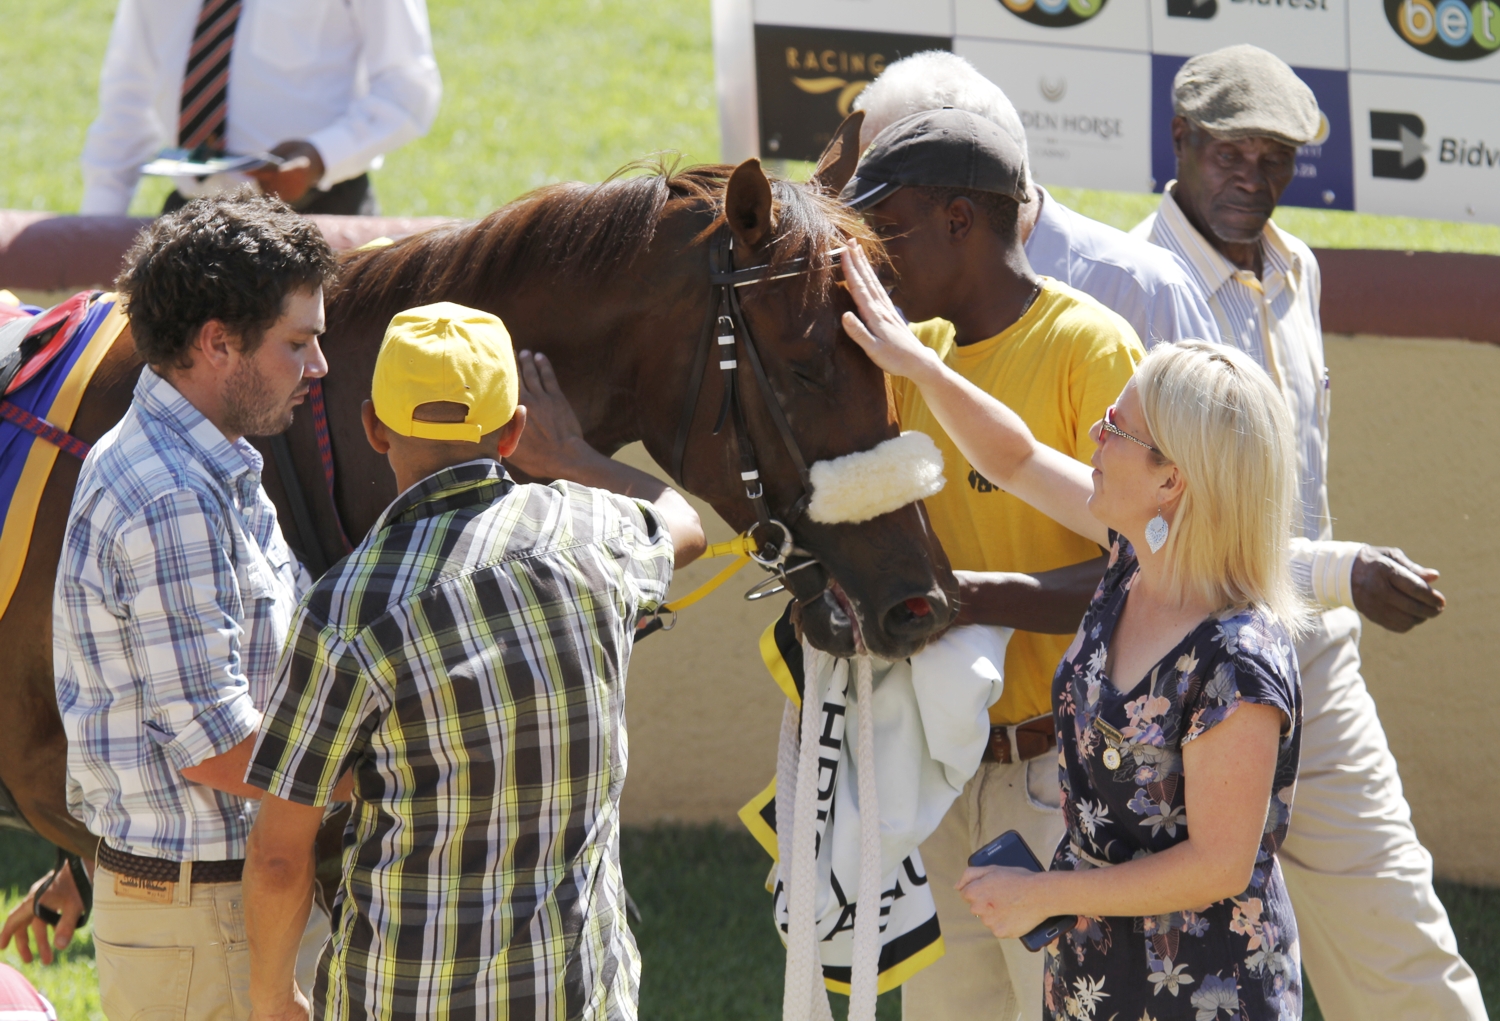 Yellow Star’s Panza Leads First KZN Breeders Series Log For 3YO’s And Up